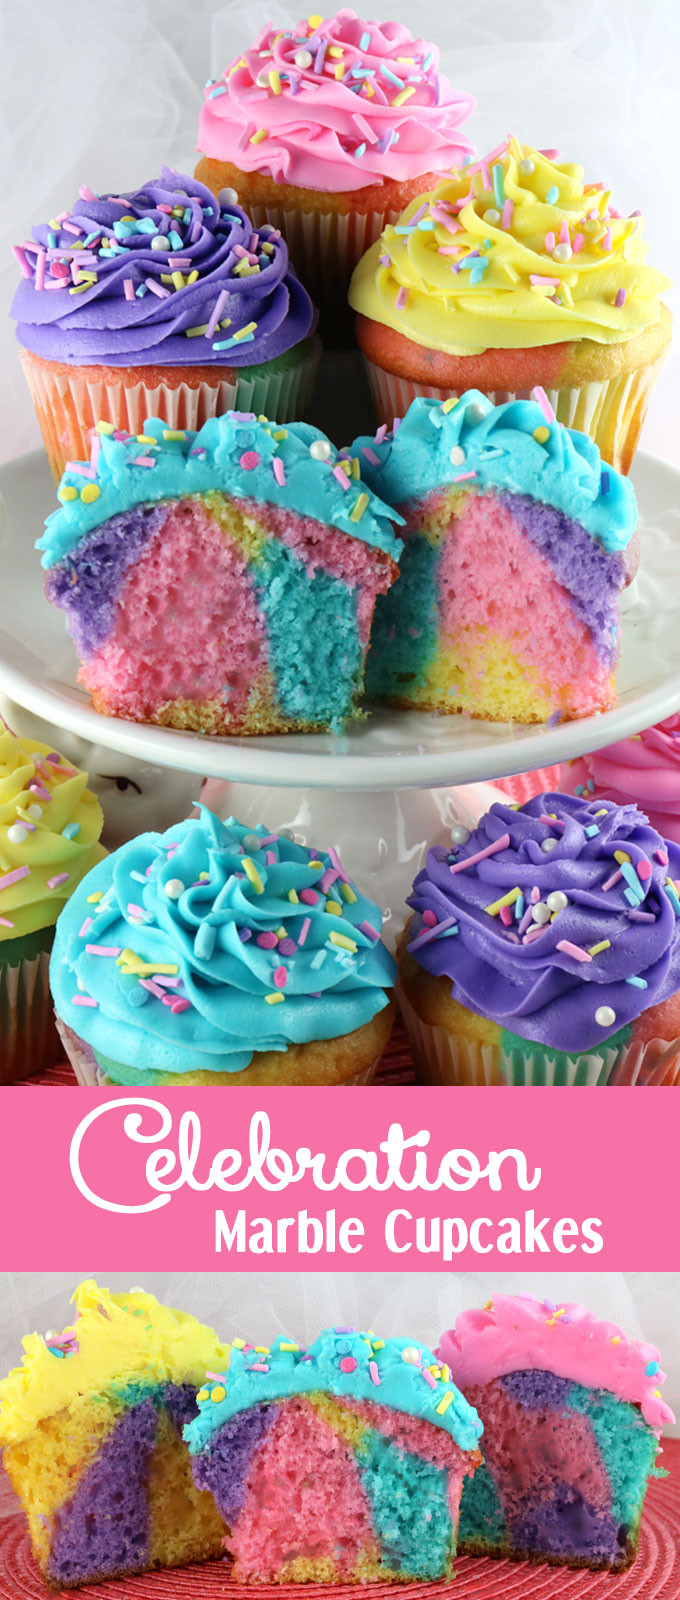 Fun Birthday Cake Ideas
 Celebration Marble Cupcakes Two Sisters Crafting